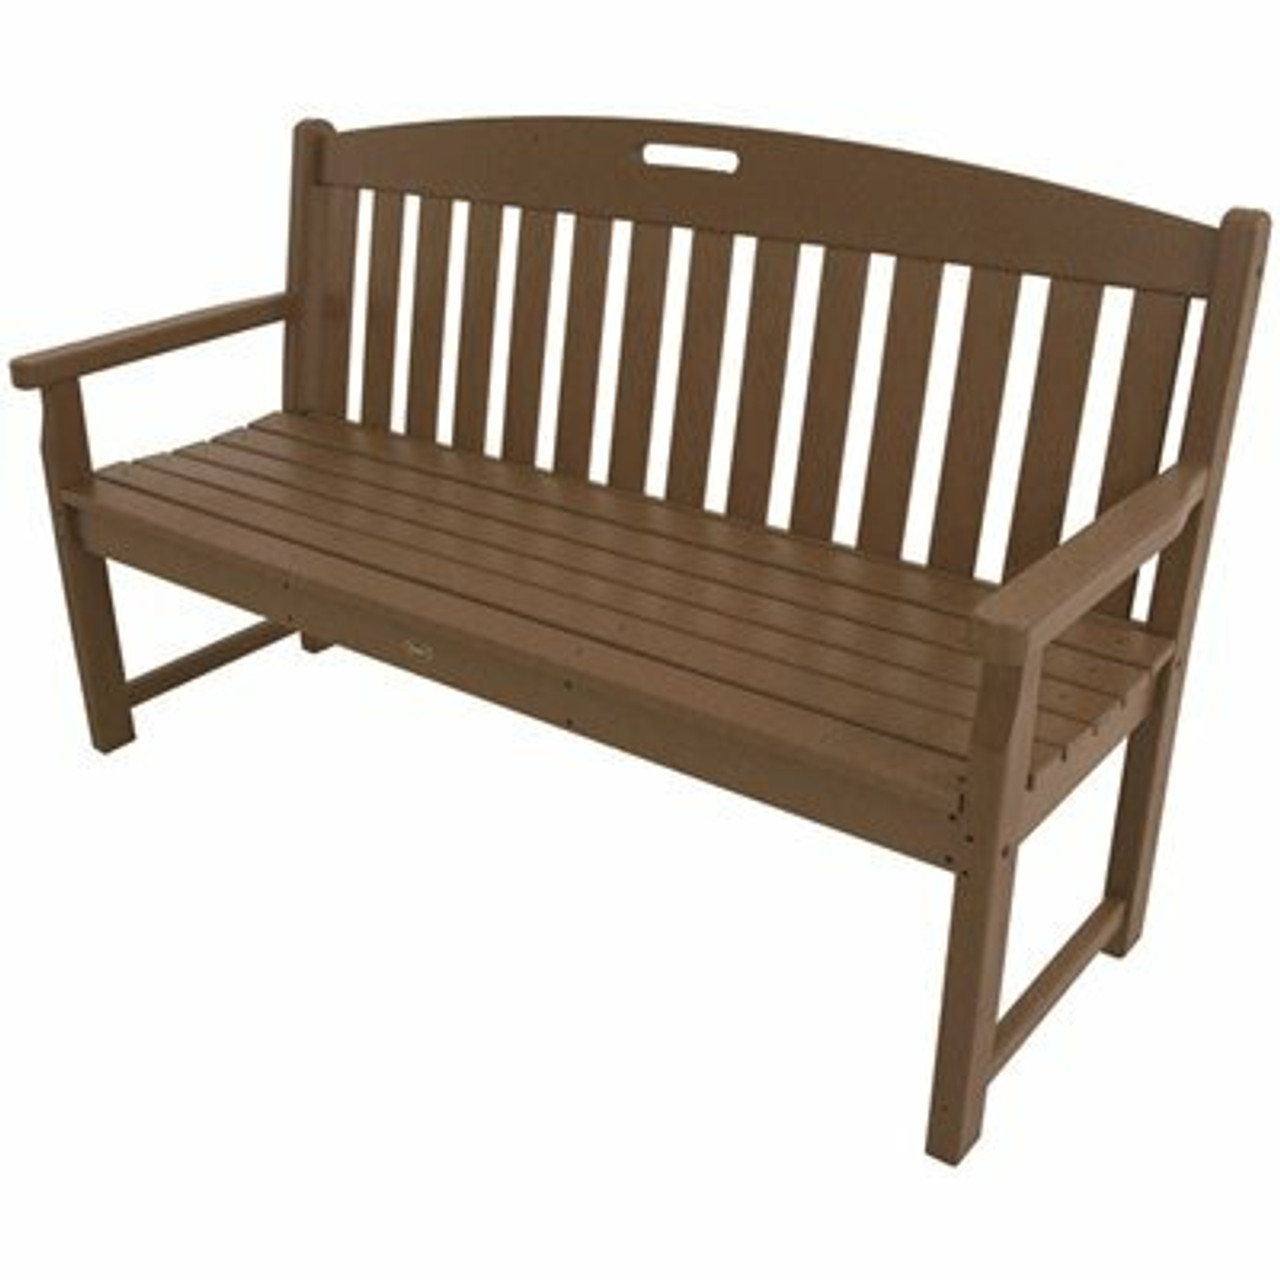 Trex Outdoor Furniture Yacht Club 60 In. Tree House Plastic Patio Bench